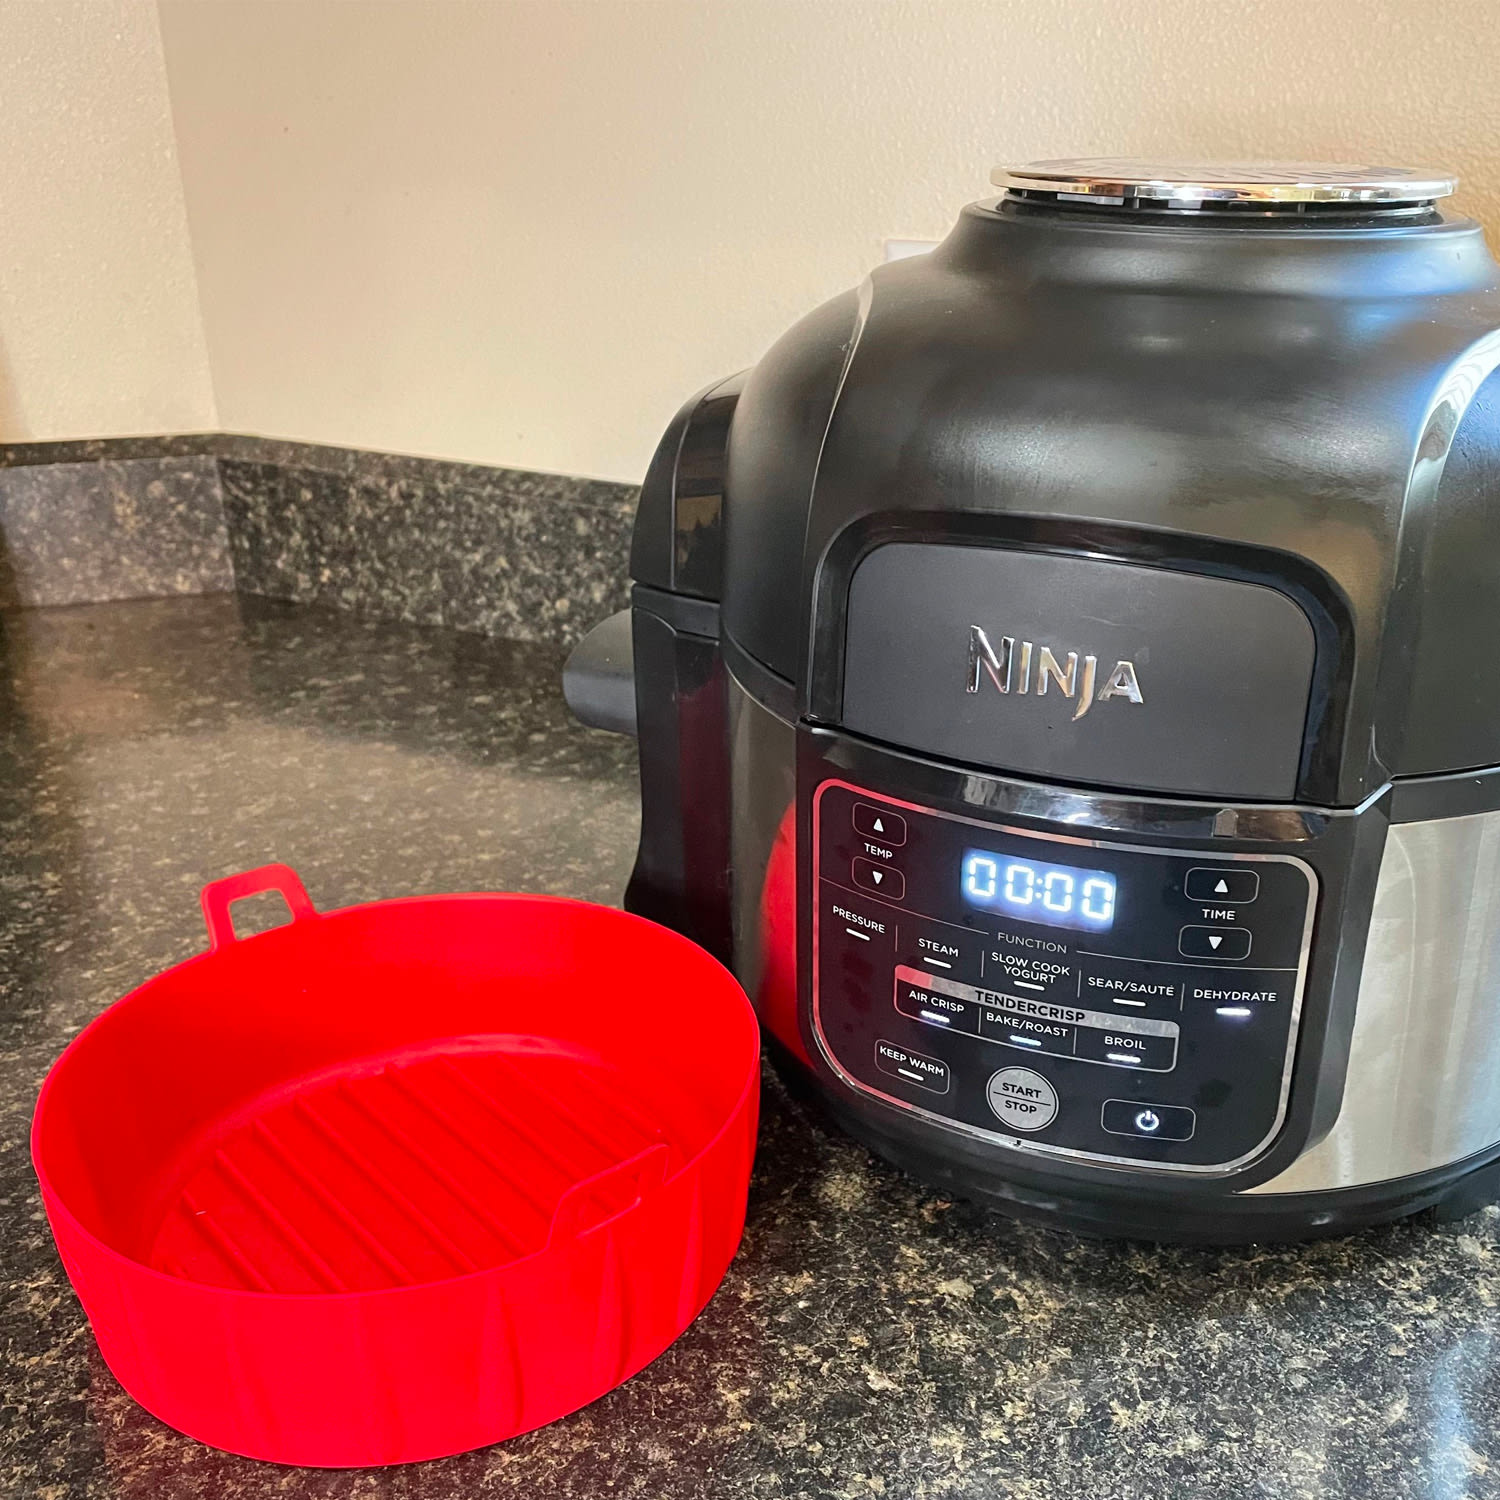 This air fryer pot keeps food crisp and makes cleanup easy